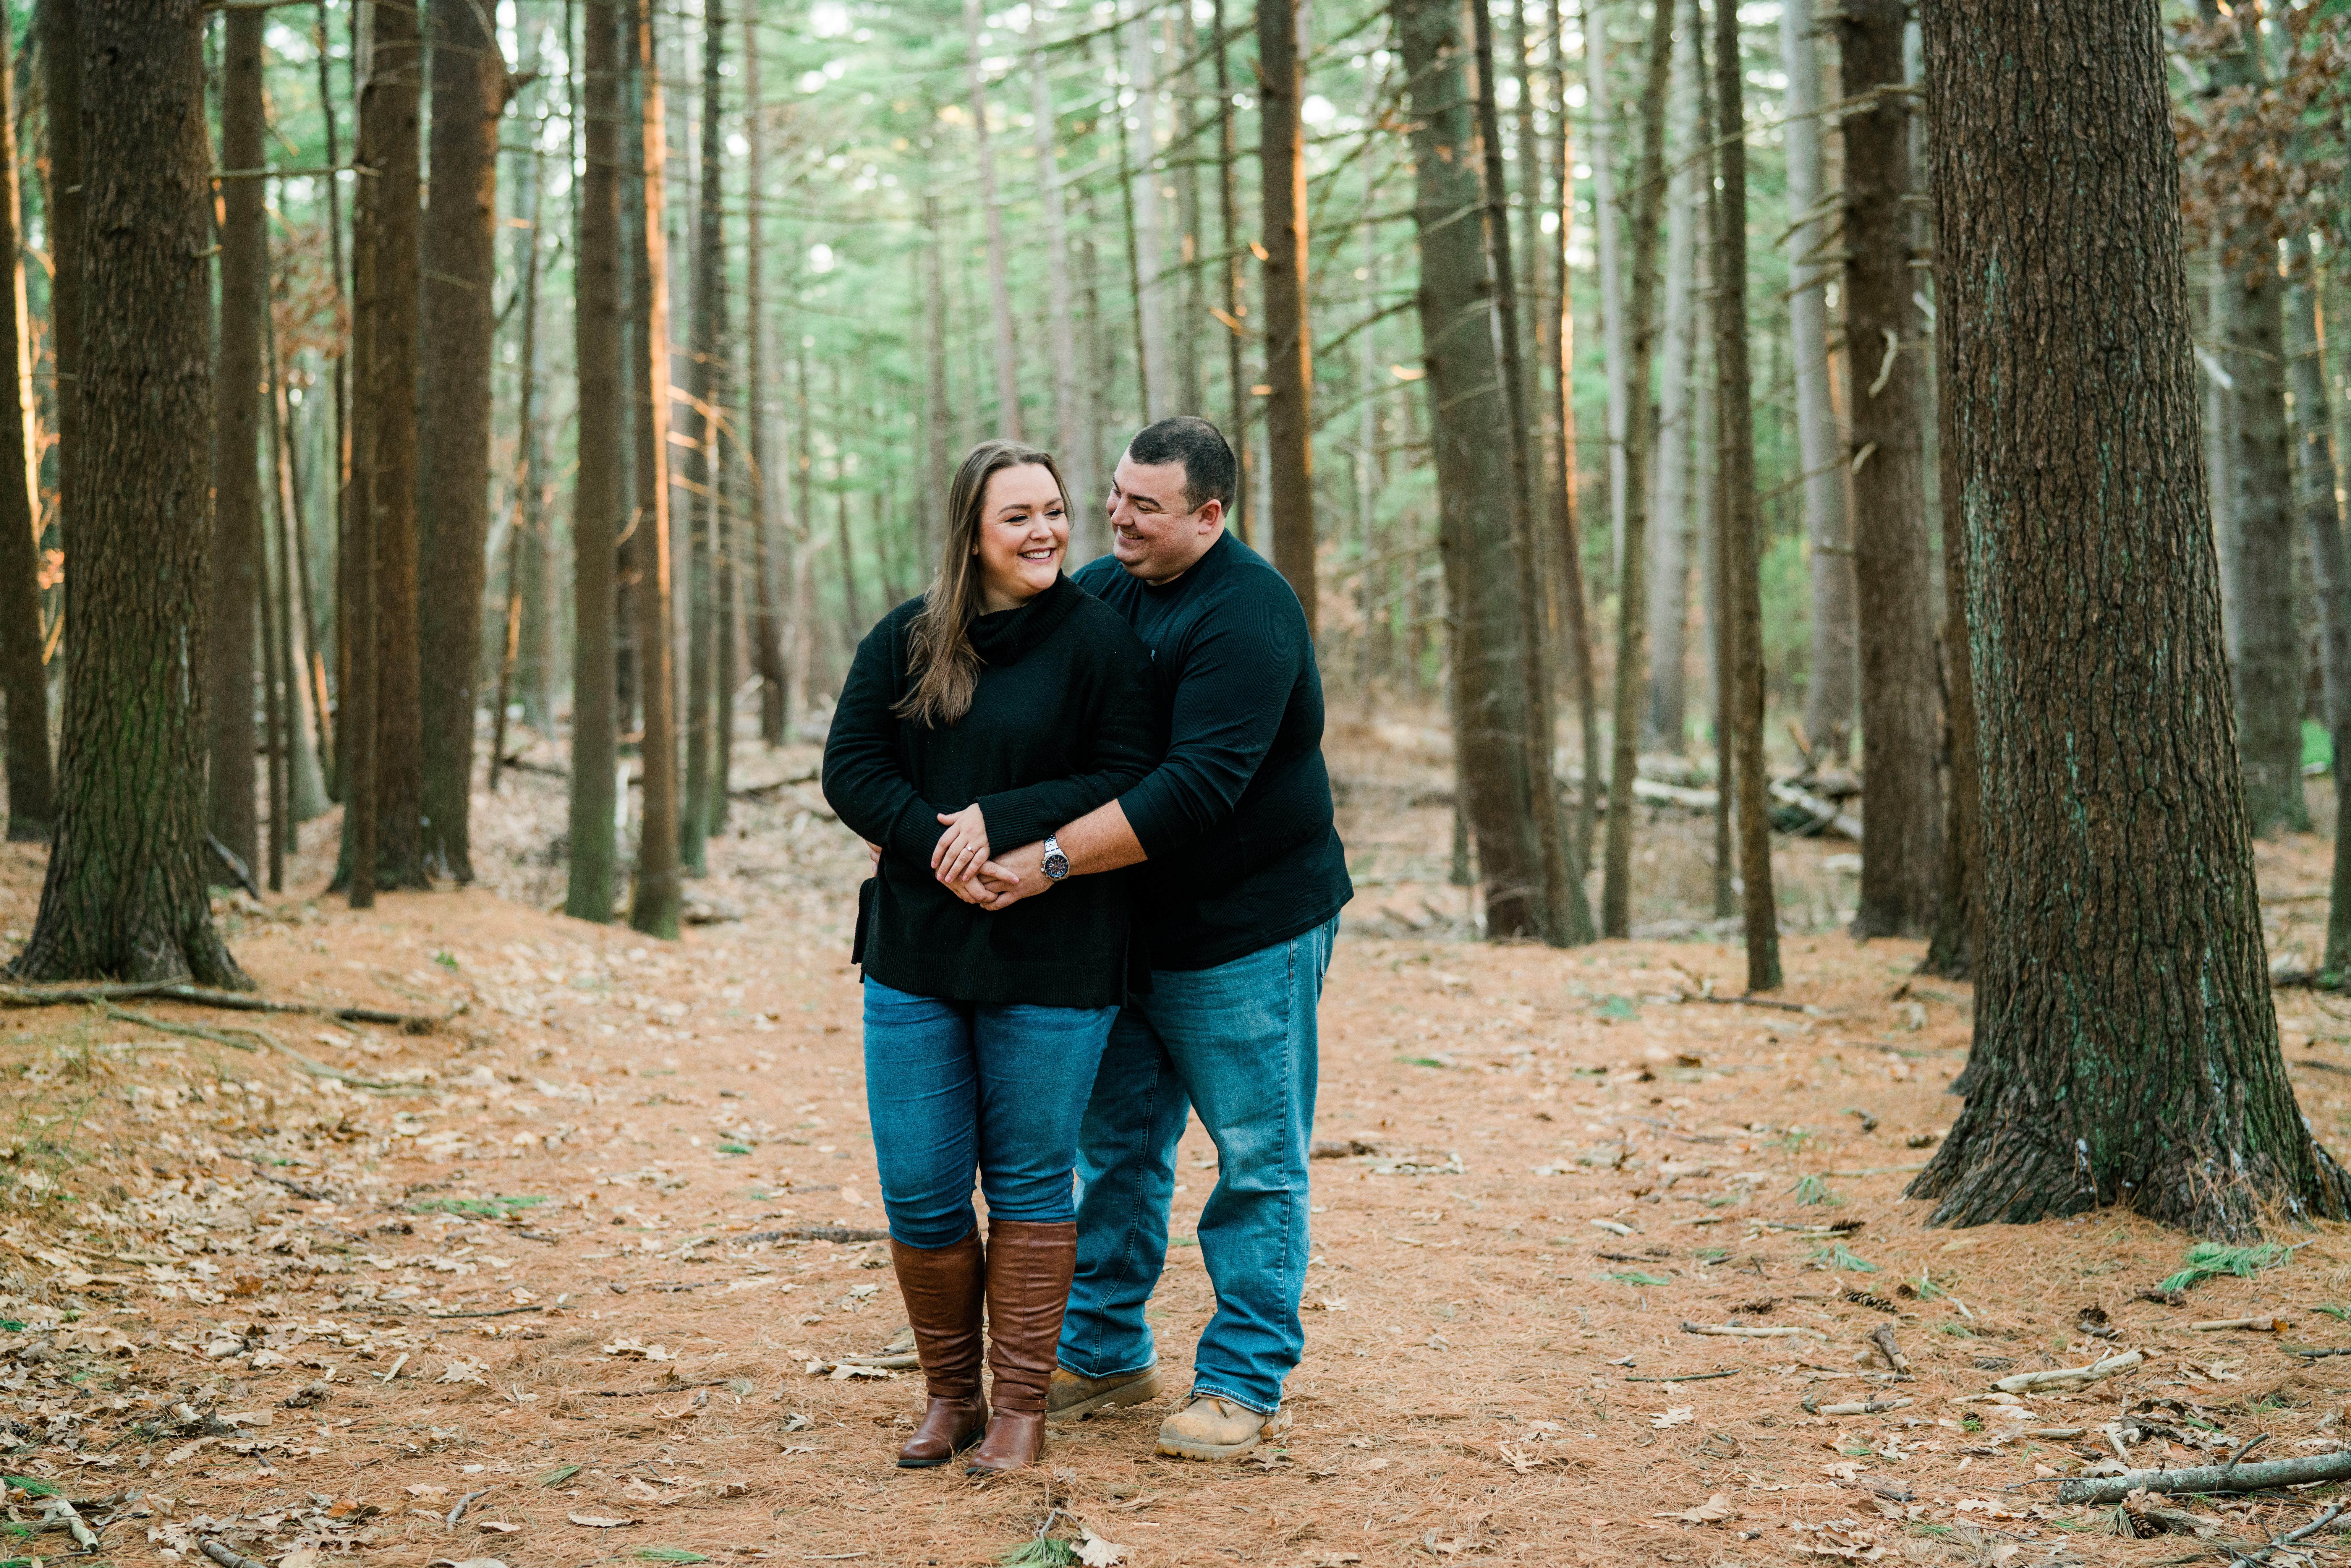 Engagement photography at Prosser Pines